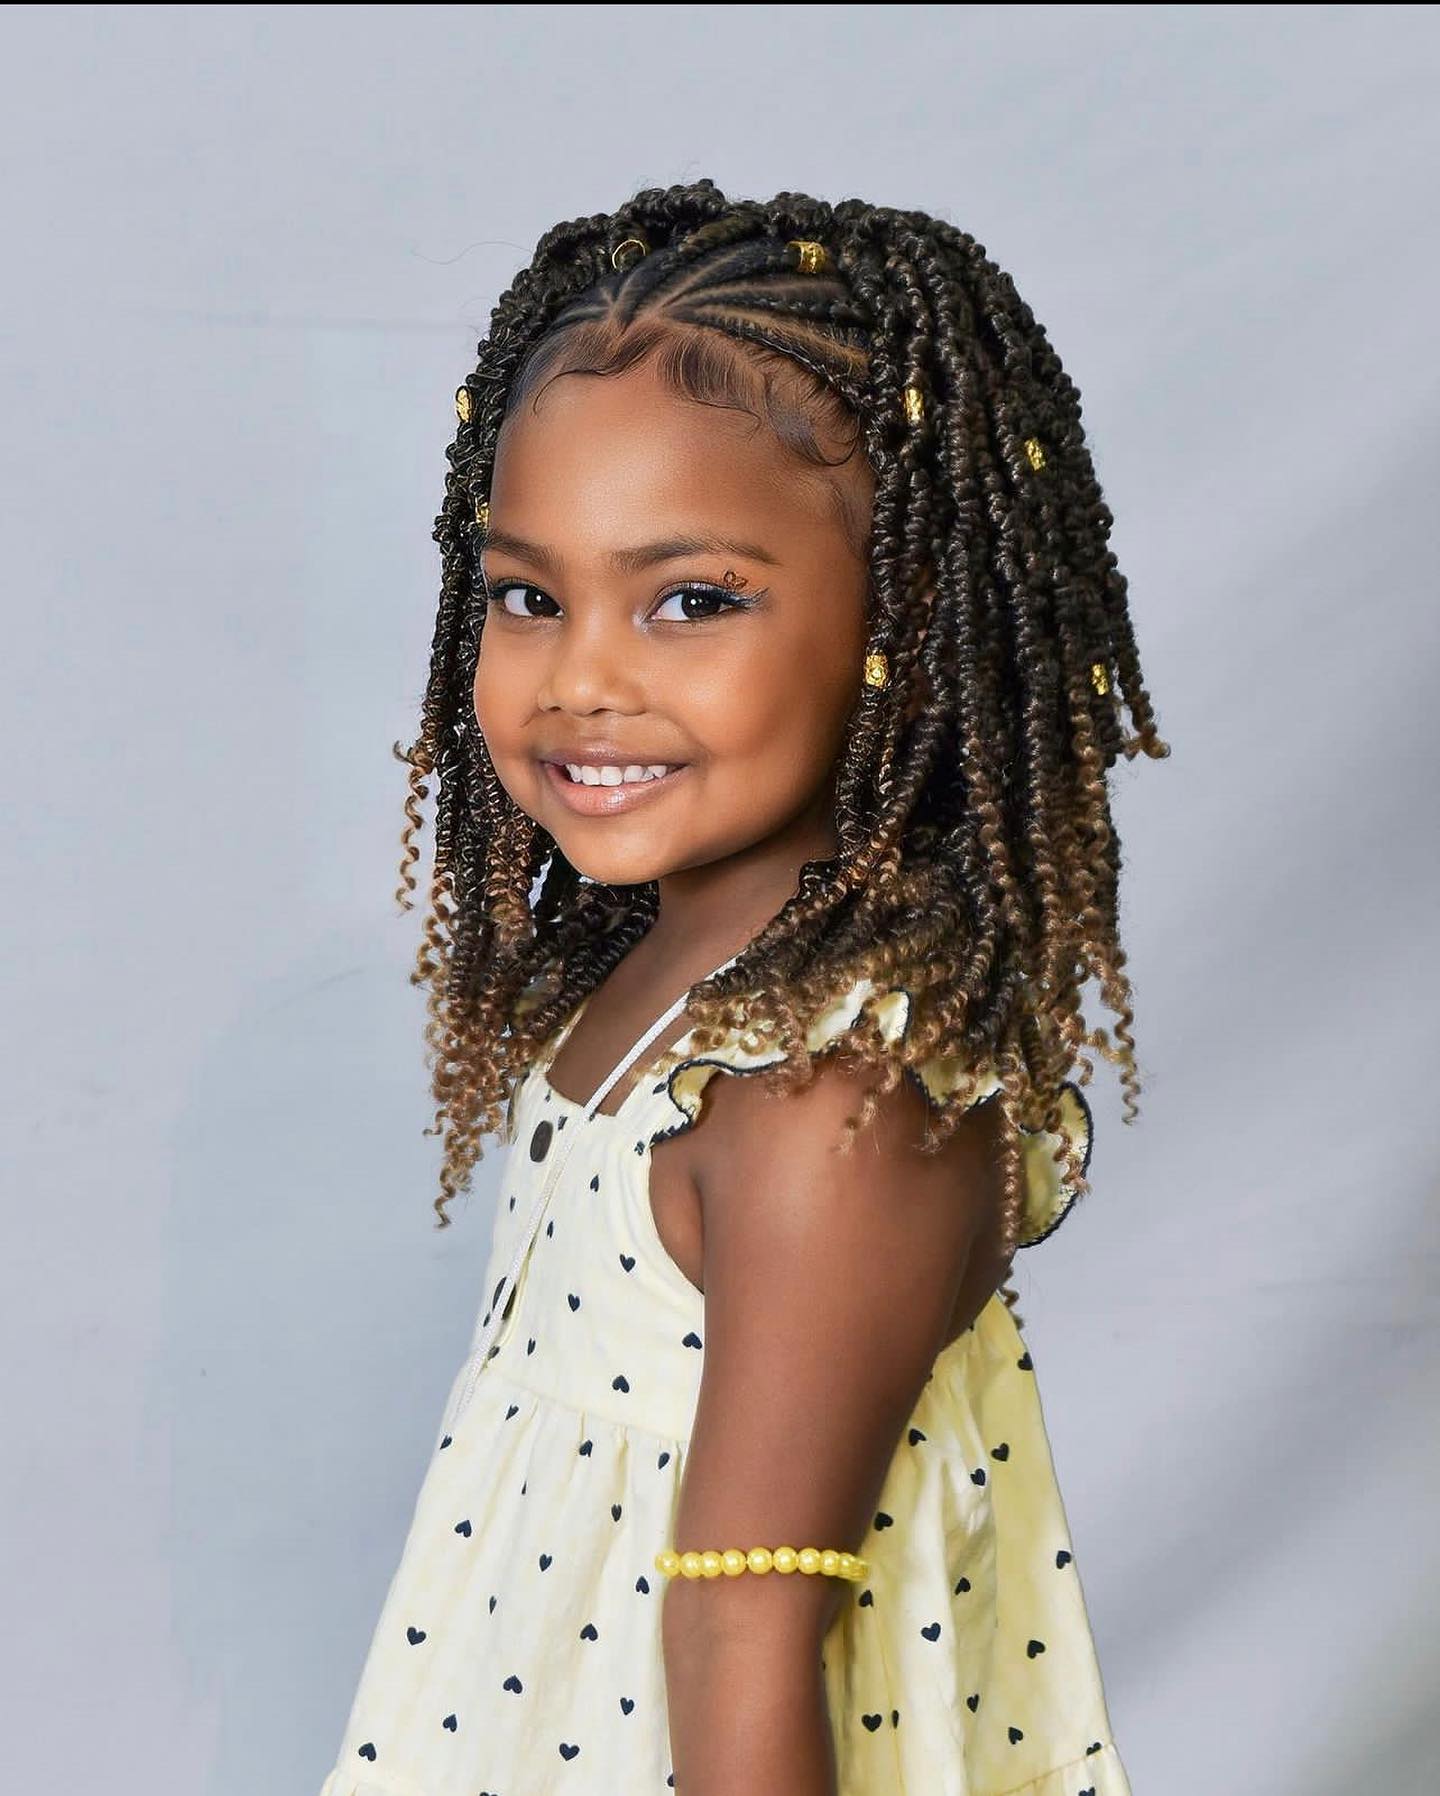 30 Cute Kids Braids Hairstyles To Try Out Now - Fashion - Nigeria